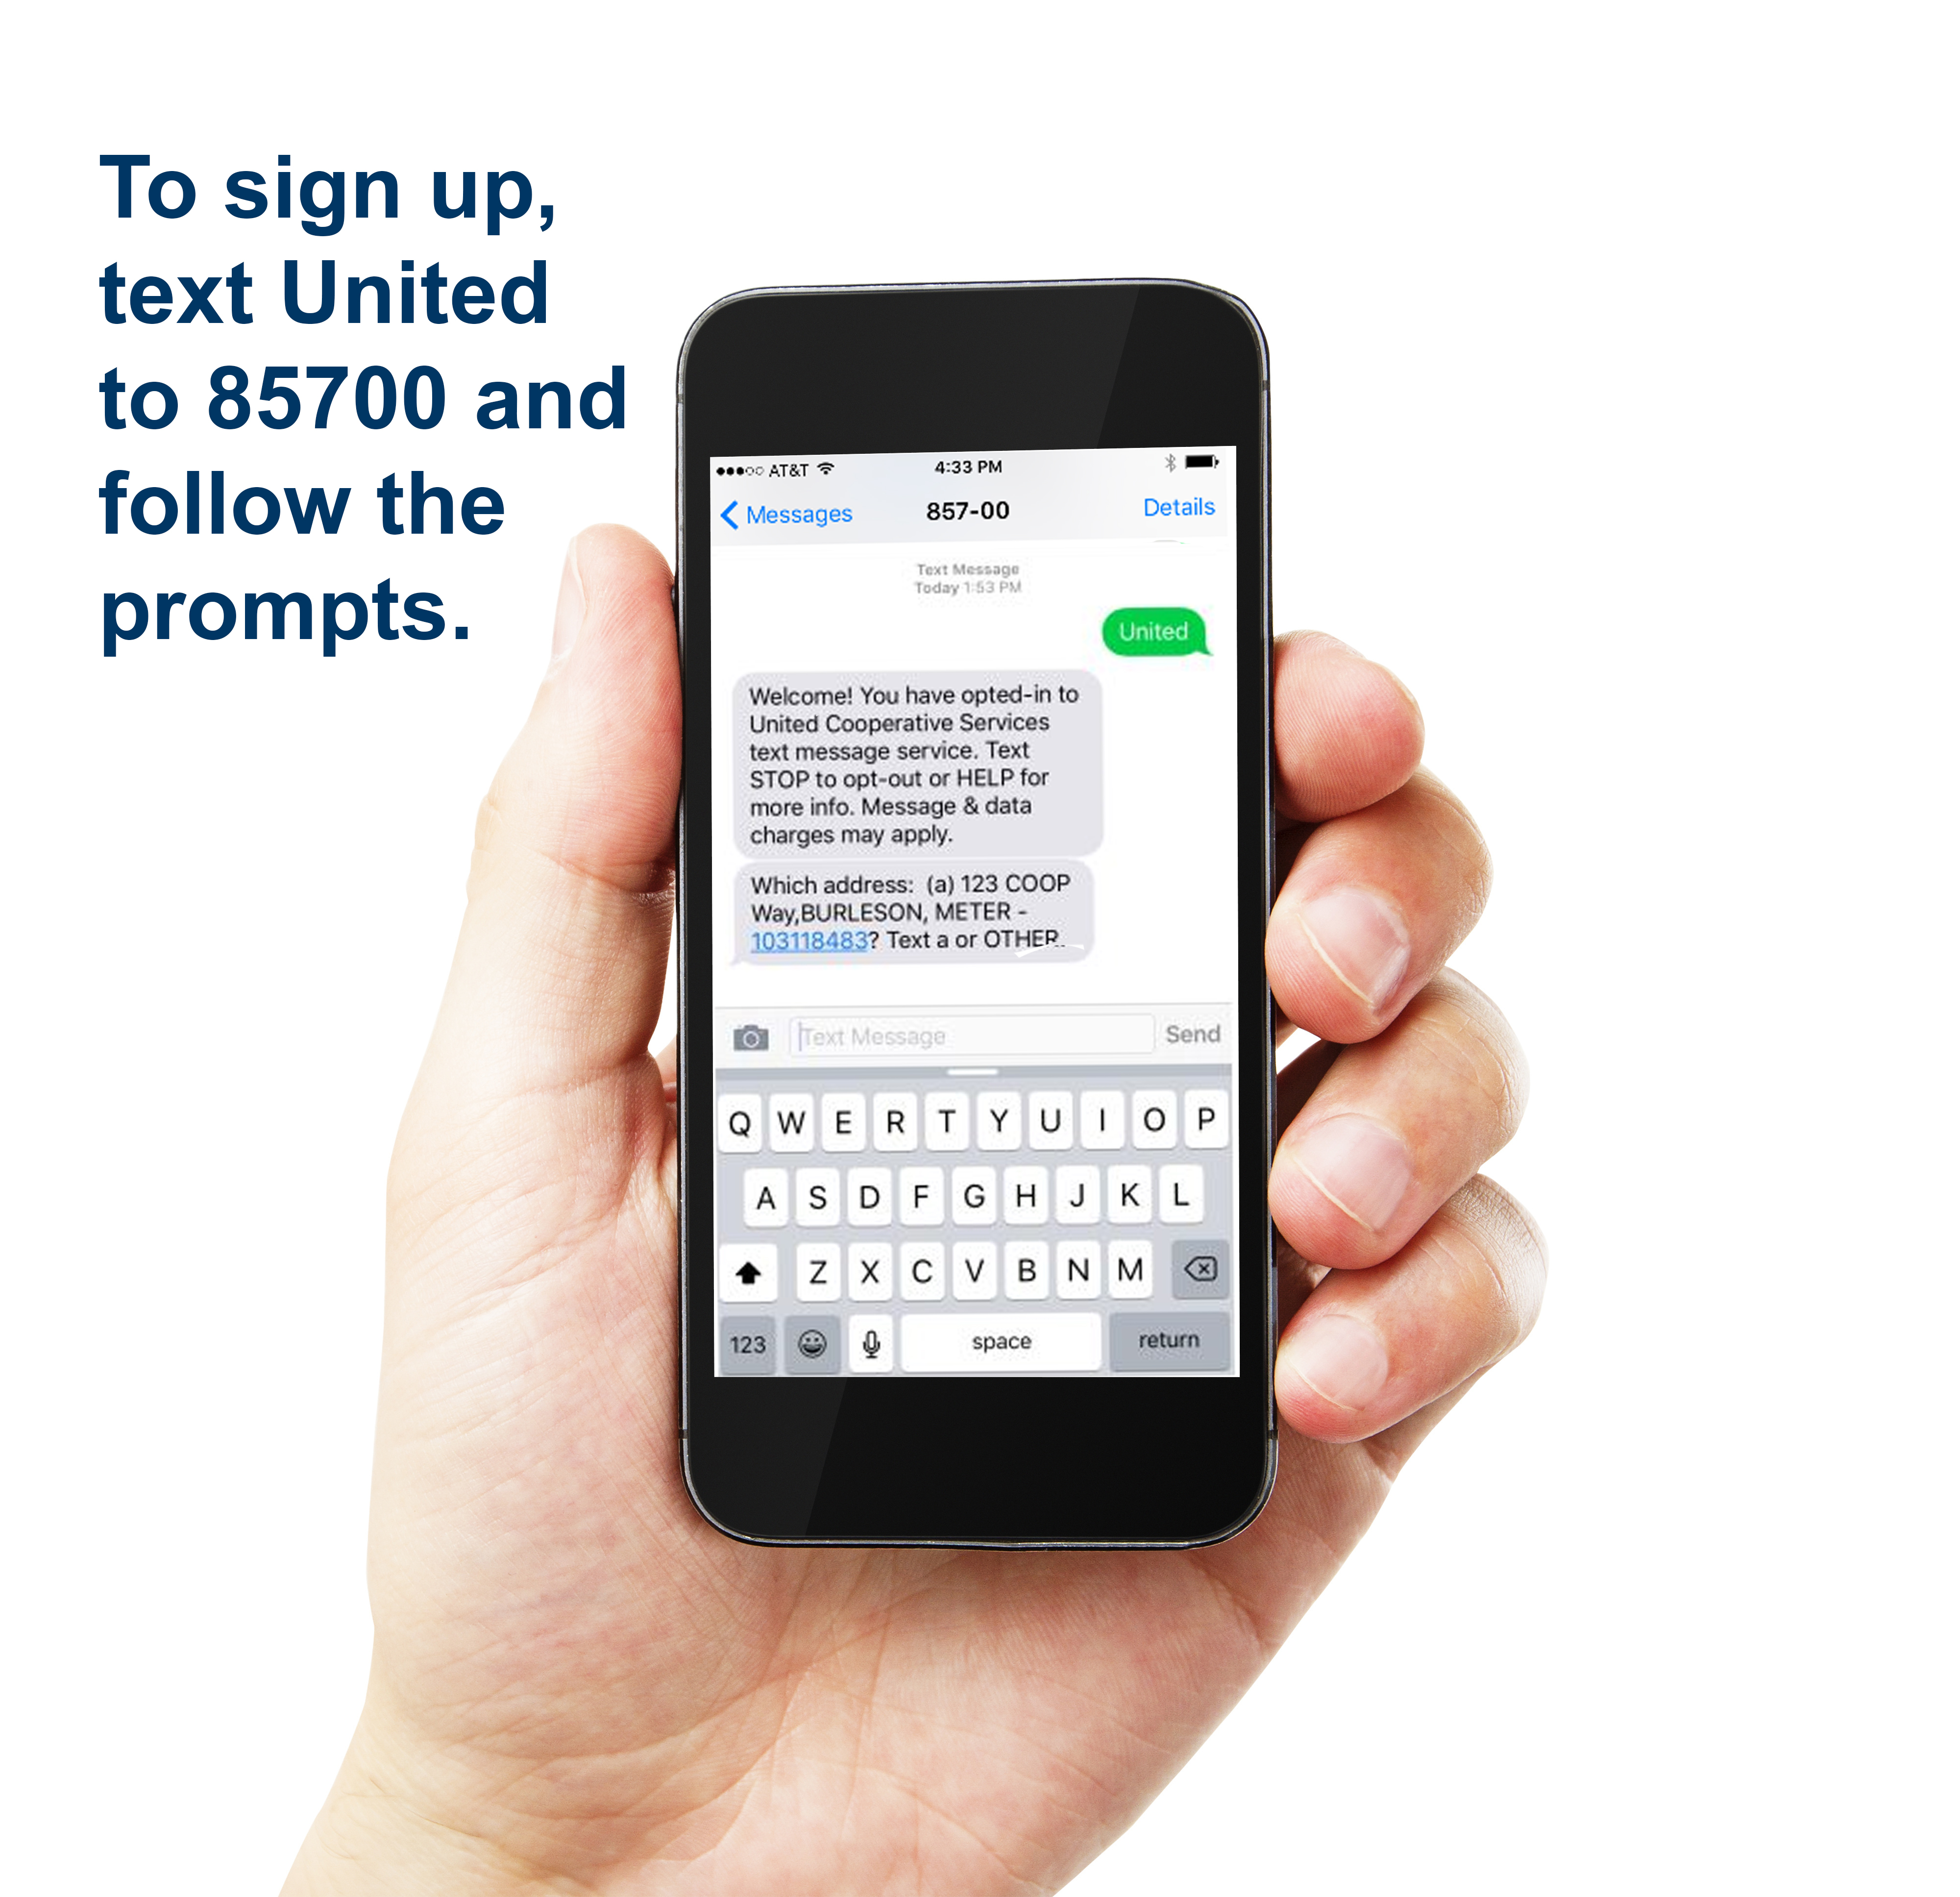 Cell phone to sigh up text United to 85700 and follow the prompts.